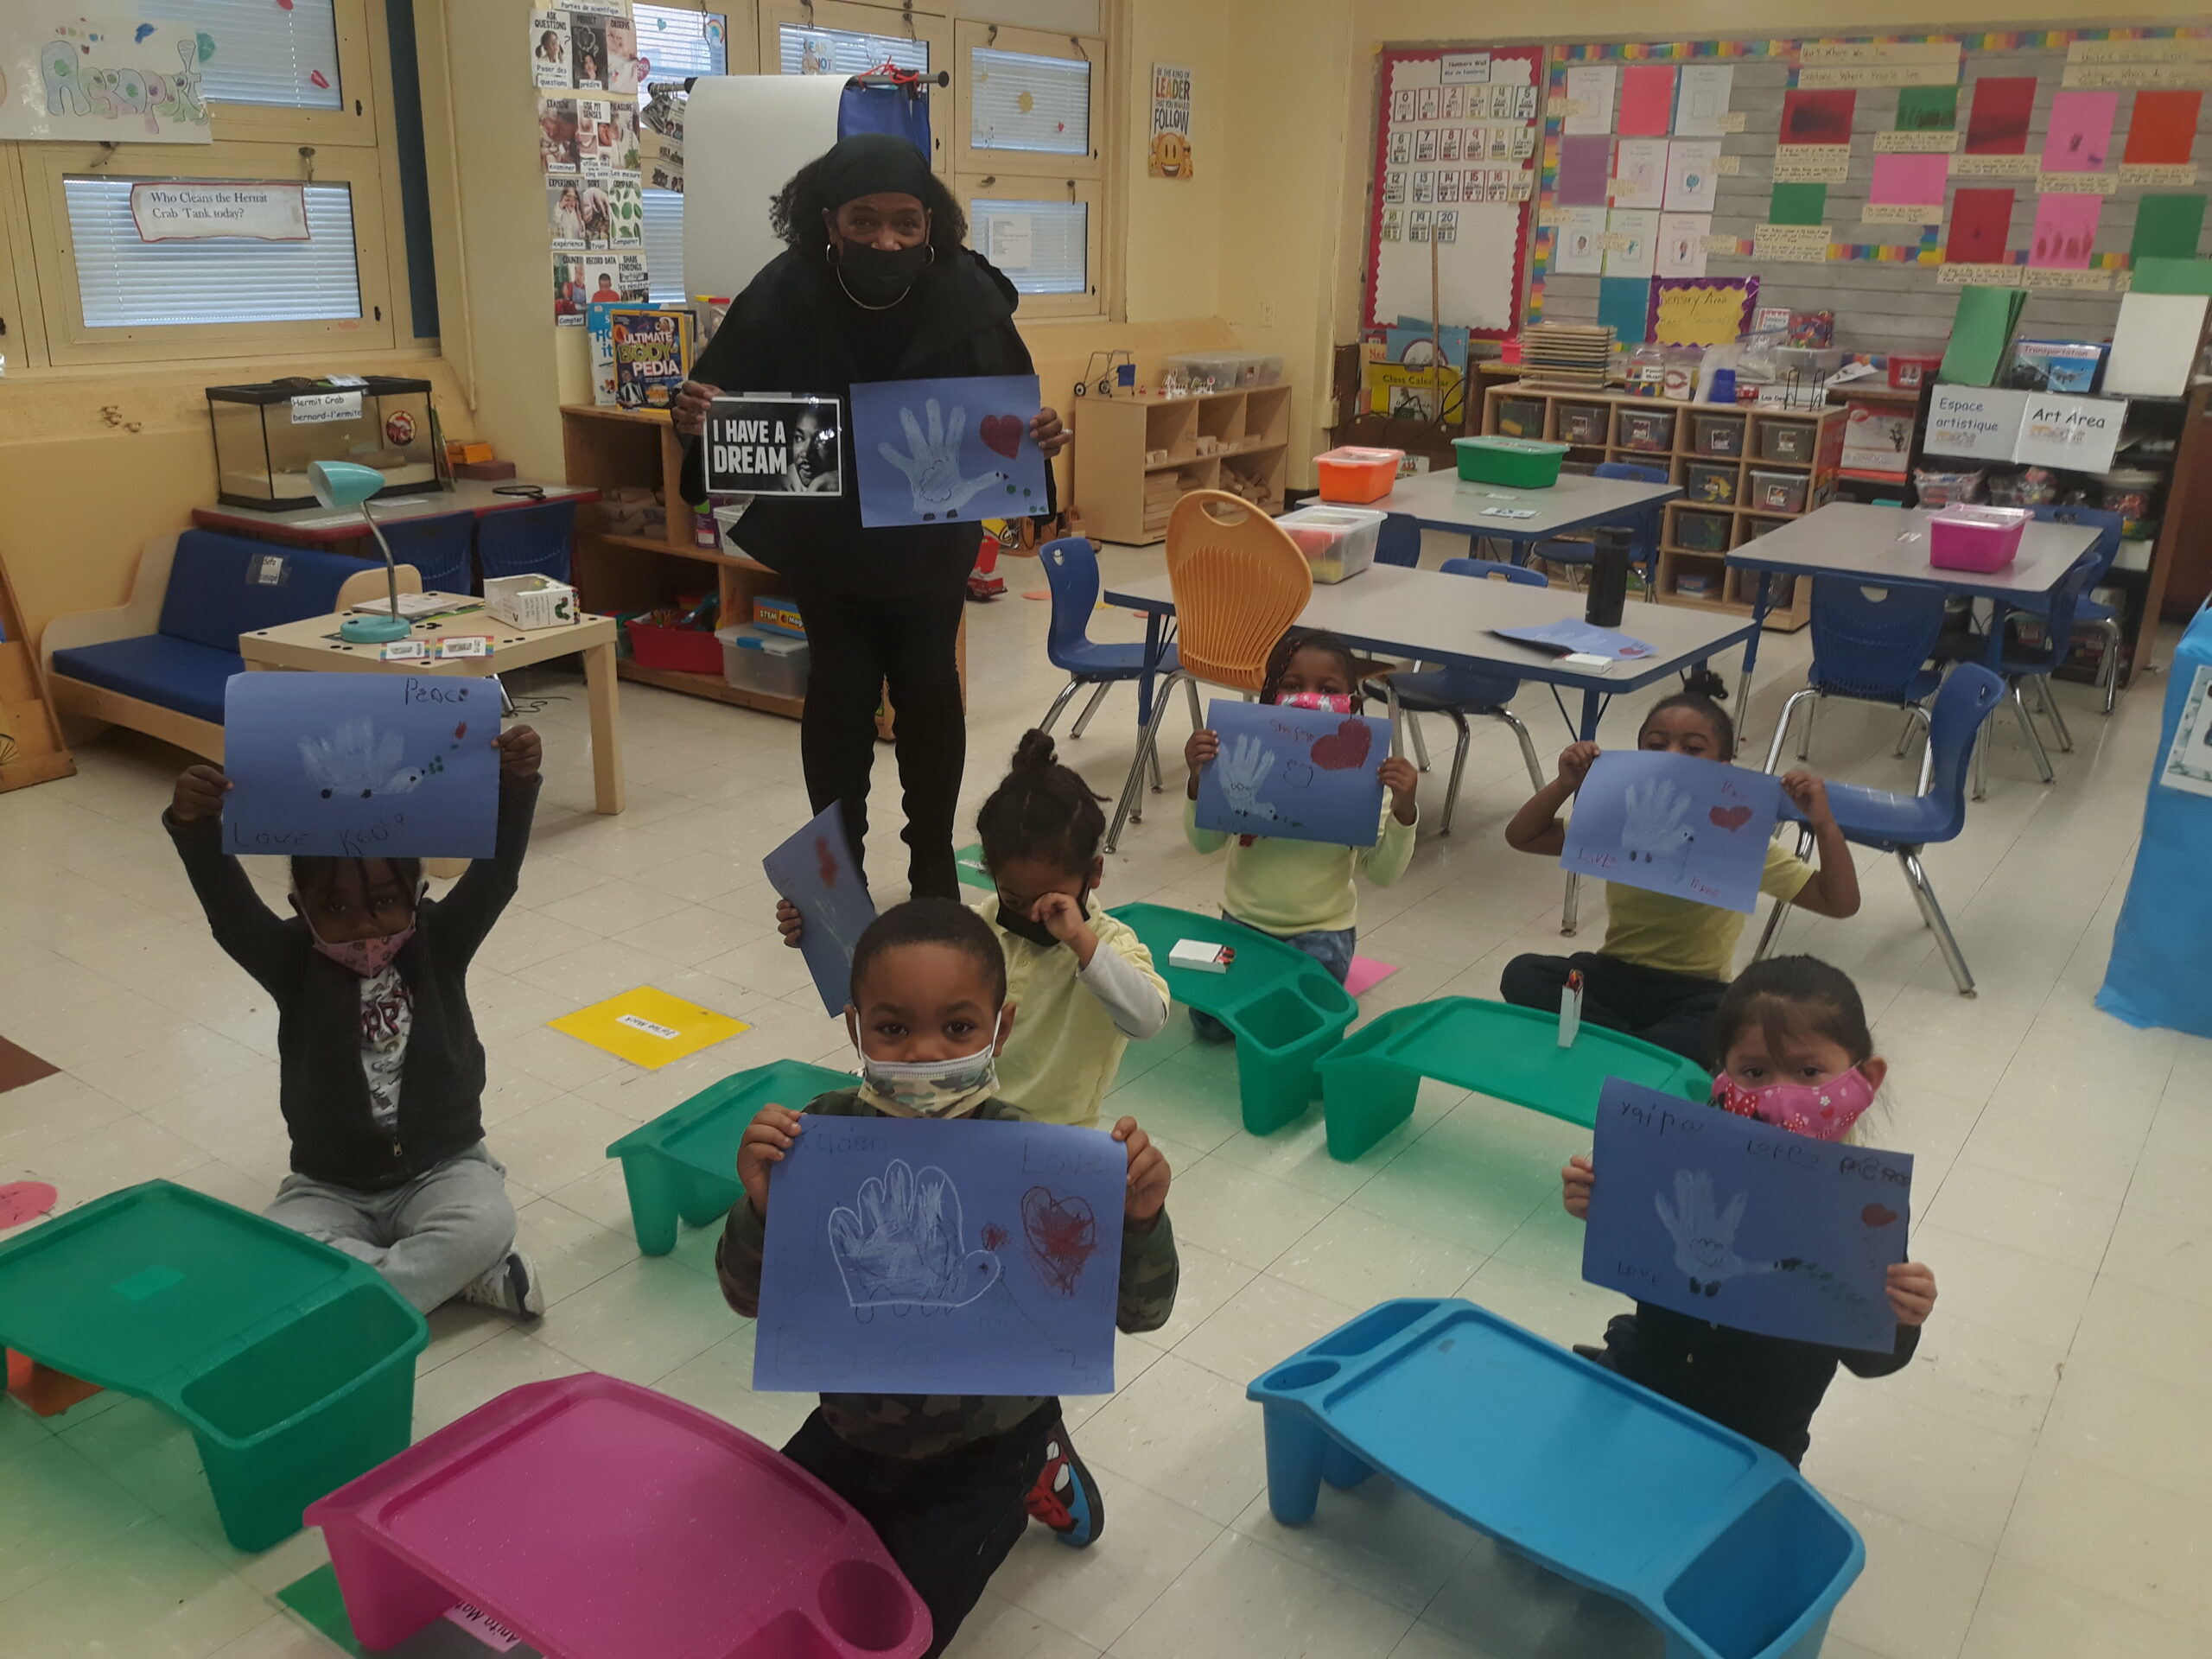 A photo of Ms. White and Kindergarten students honoring the legacy of Dr. Martin Luther King Jr.